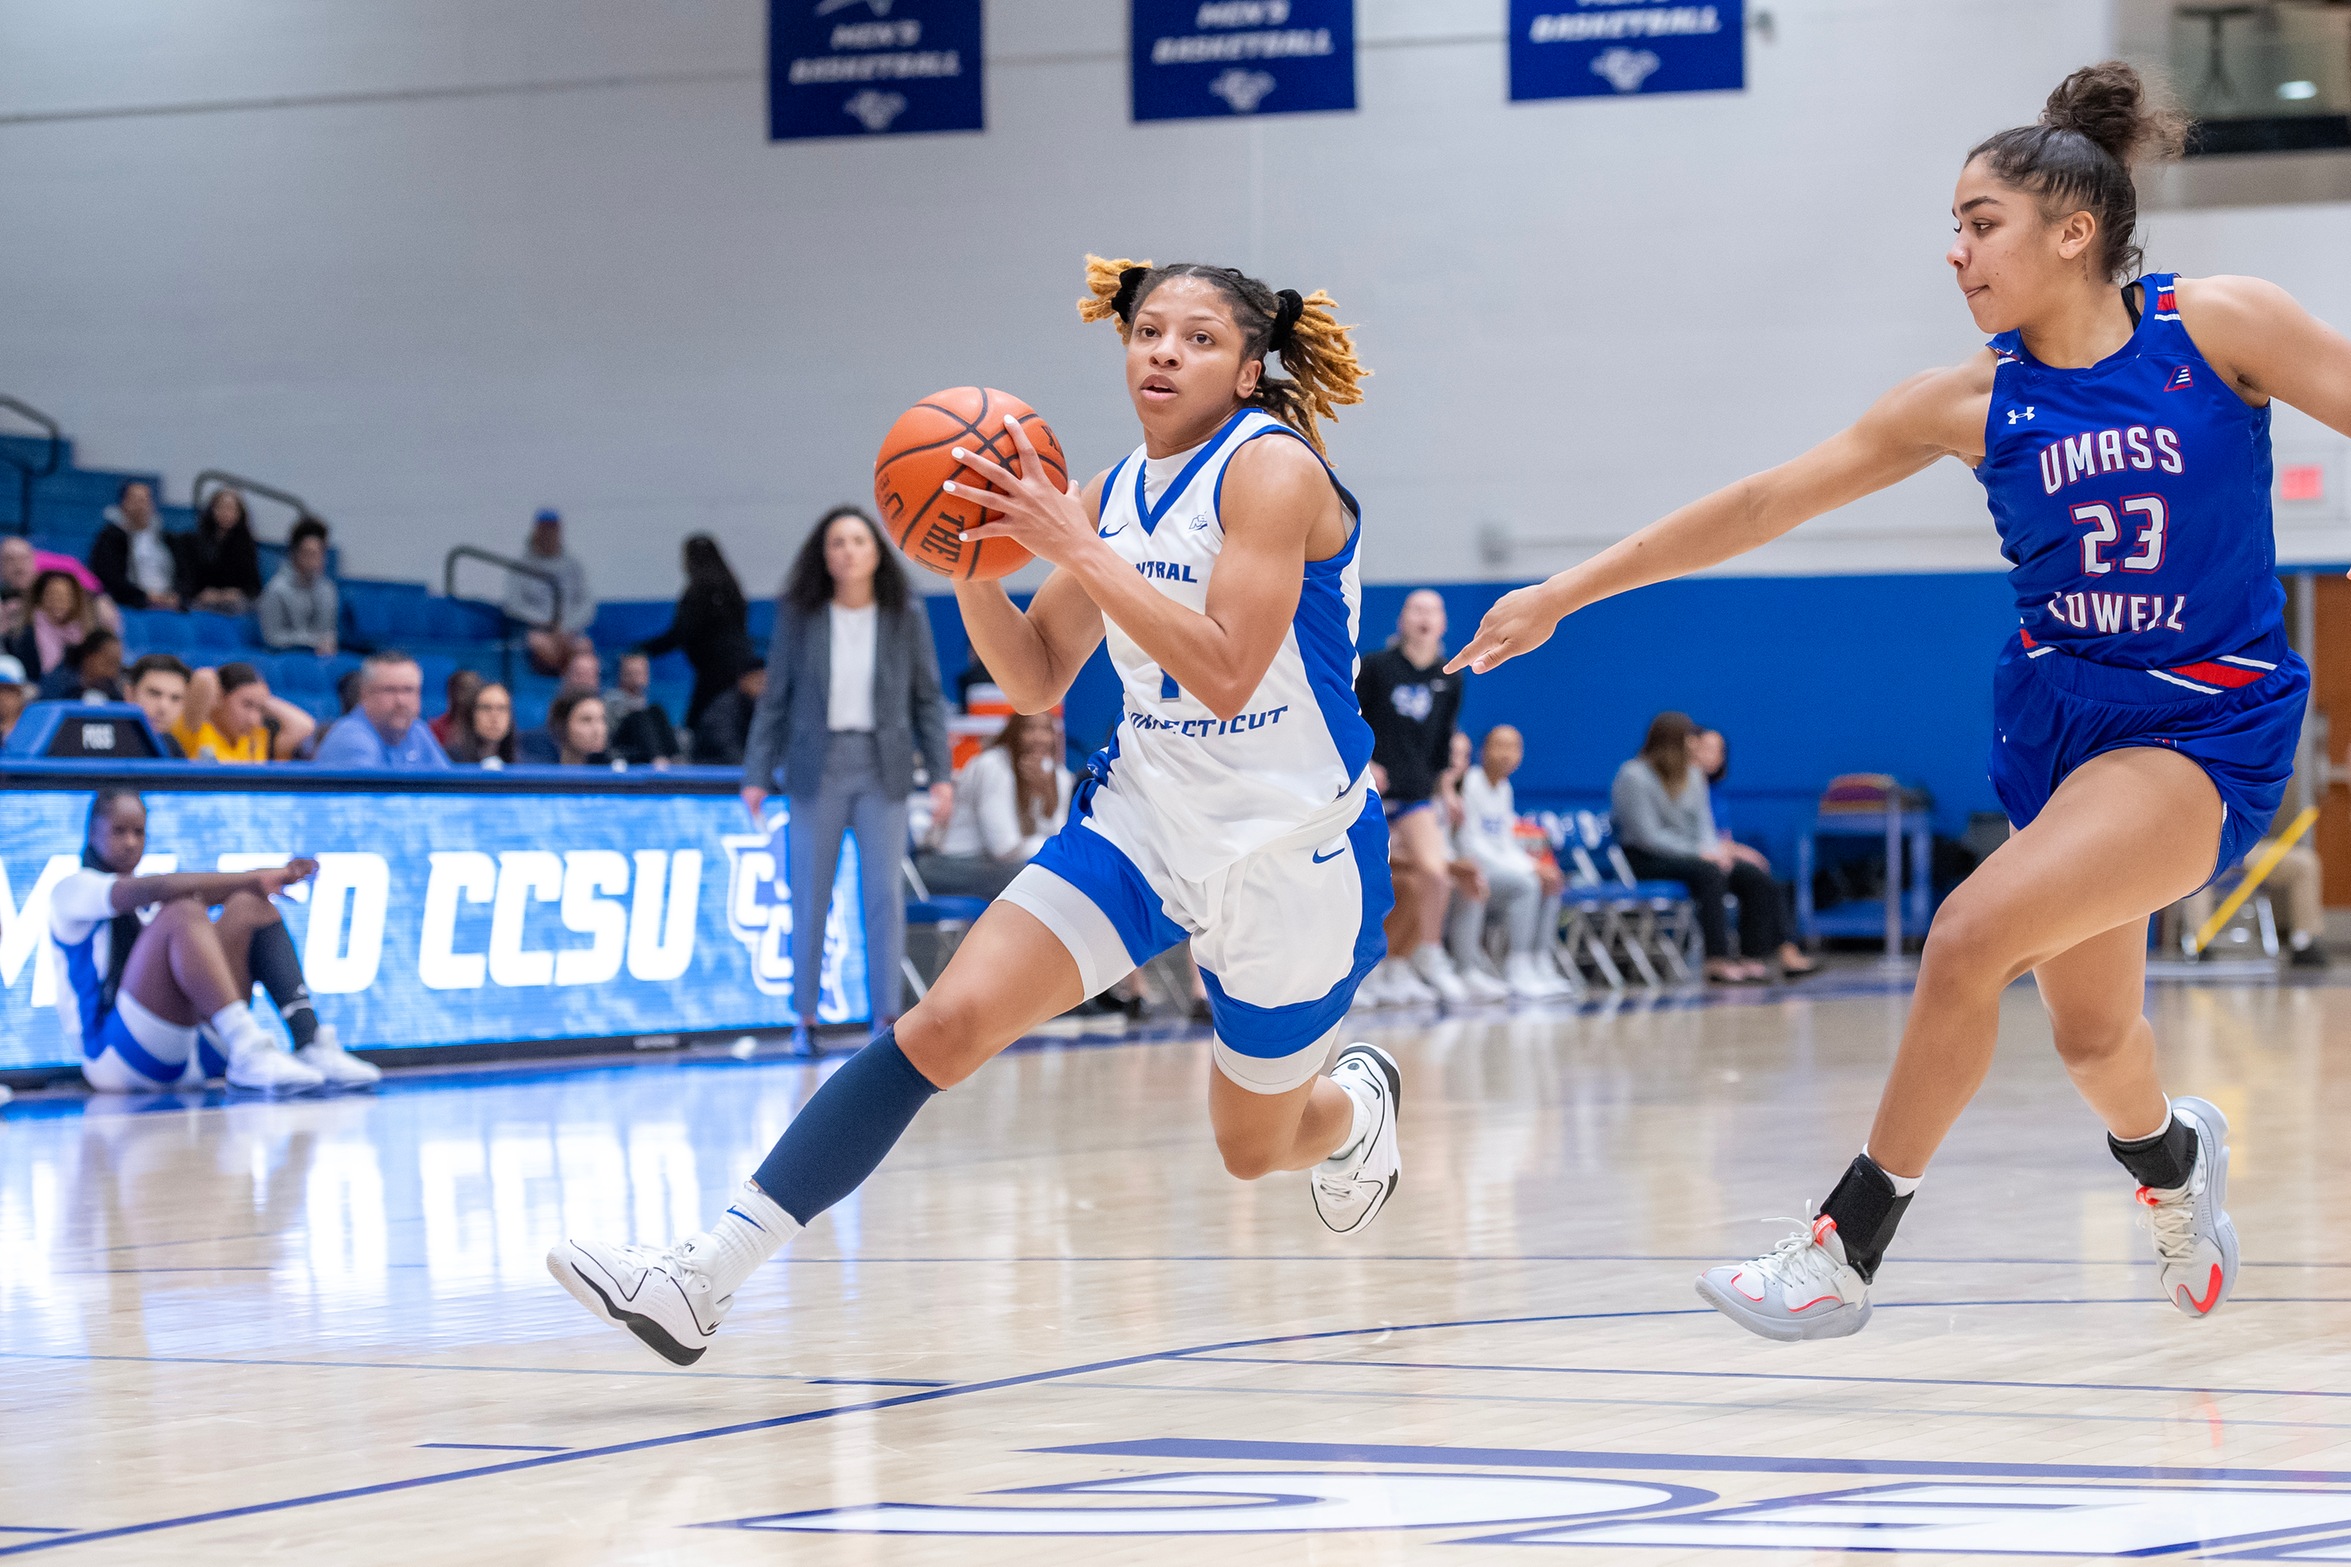 Women's Basketball Clinches Playoff Berth With a 65-56 Win Over LIU